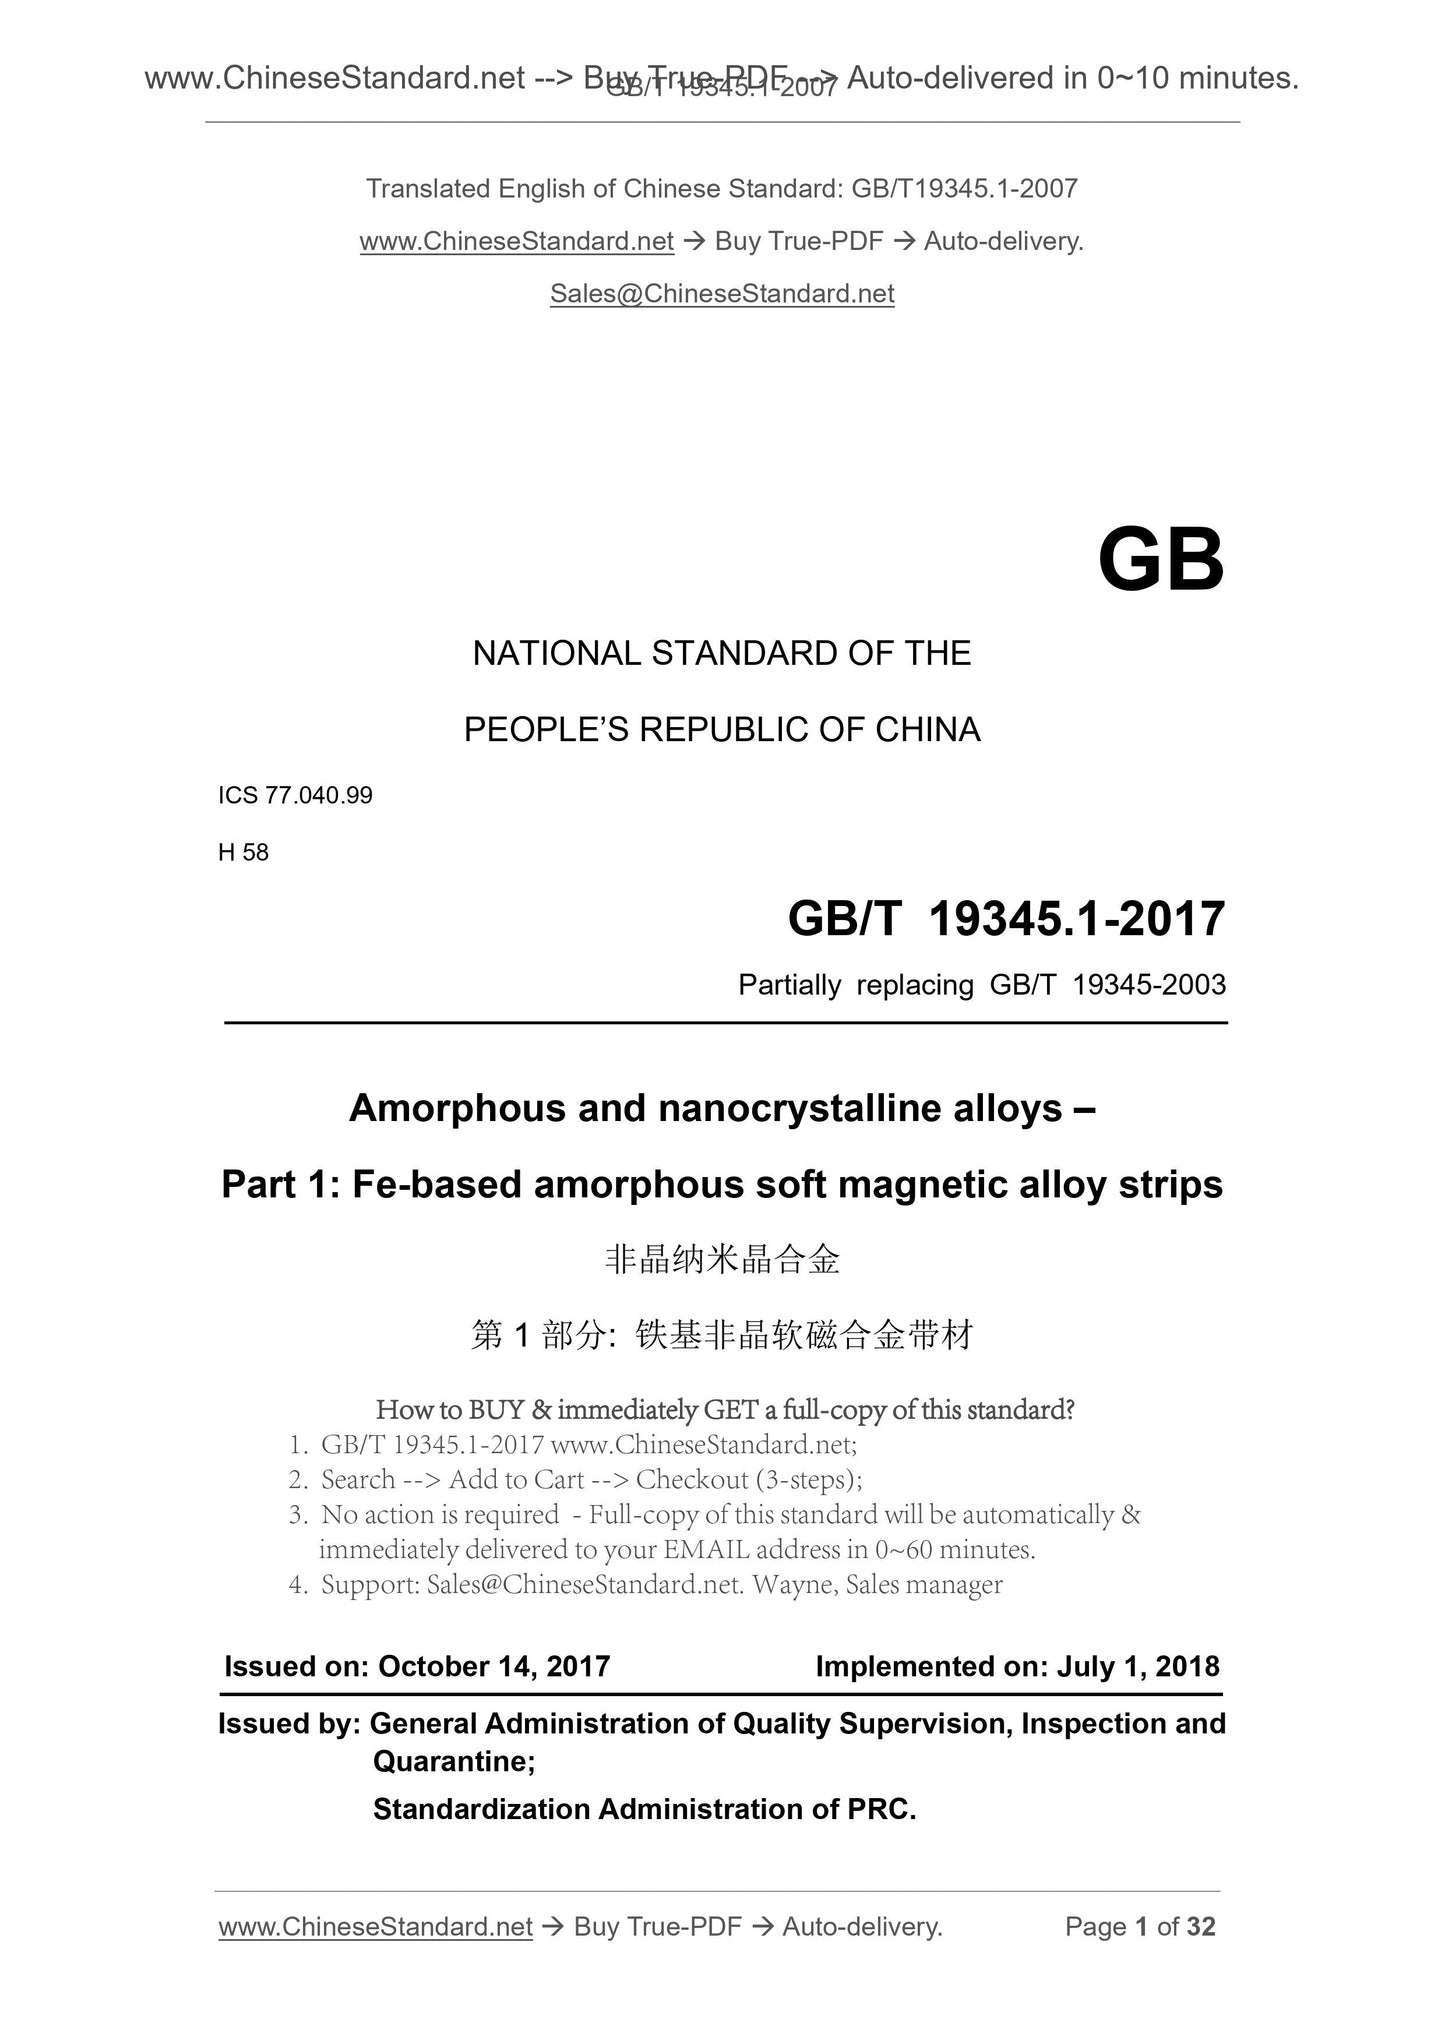 GB/T 19345.1-2017 Page 1